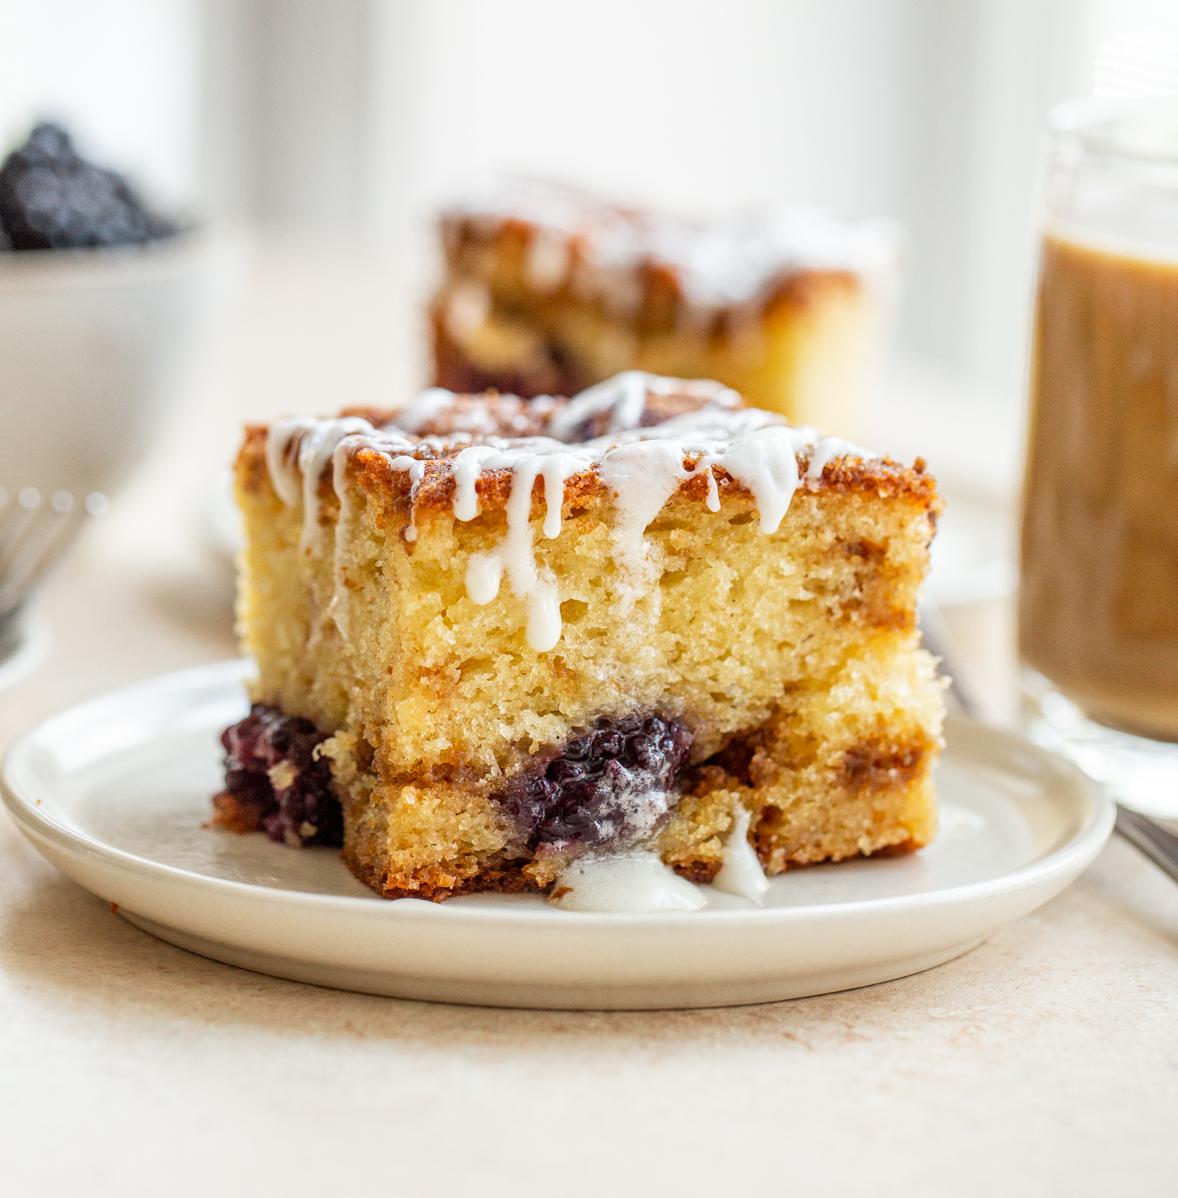  Say hello to your new favorite morning treat - blackberry coffee cake